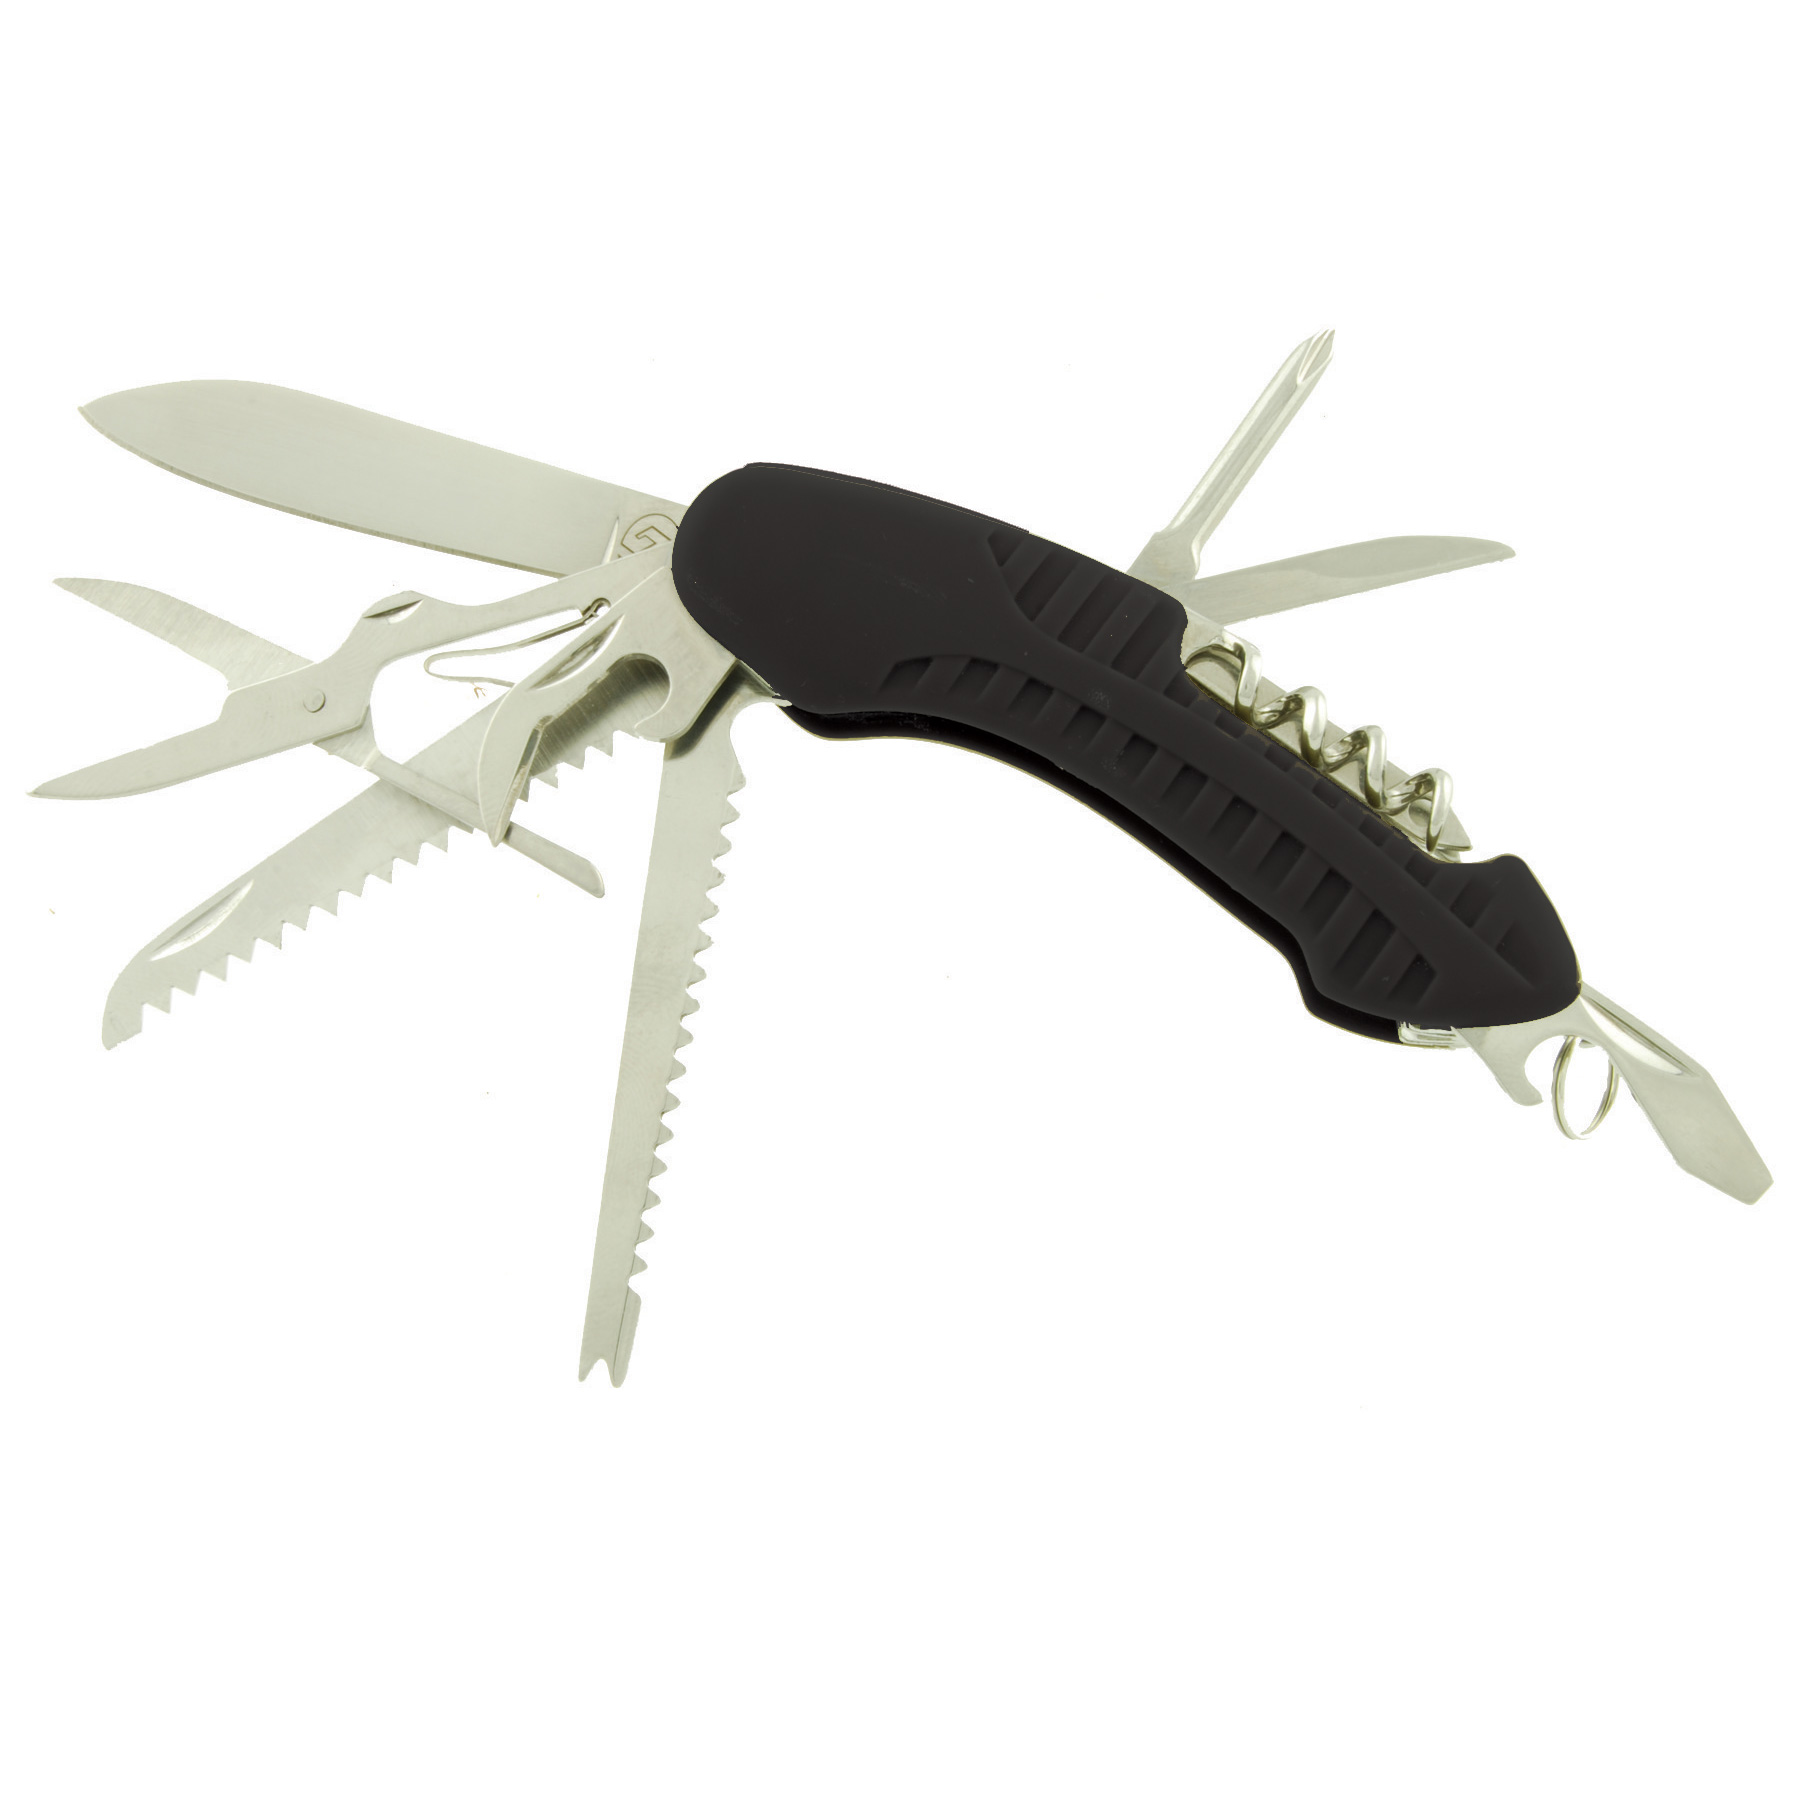 MULTIFUNCTION CAMP KNIFE 3.75